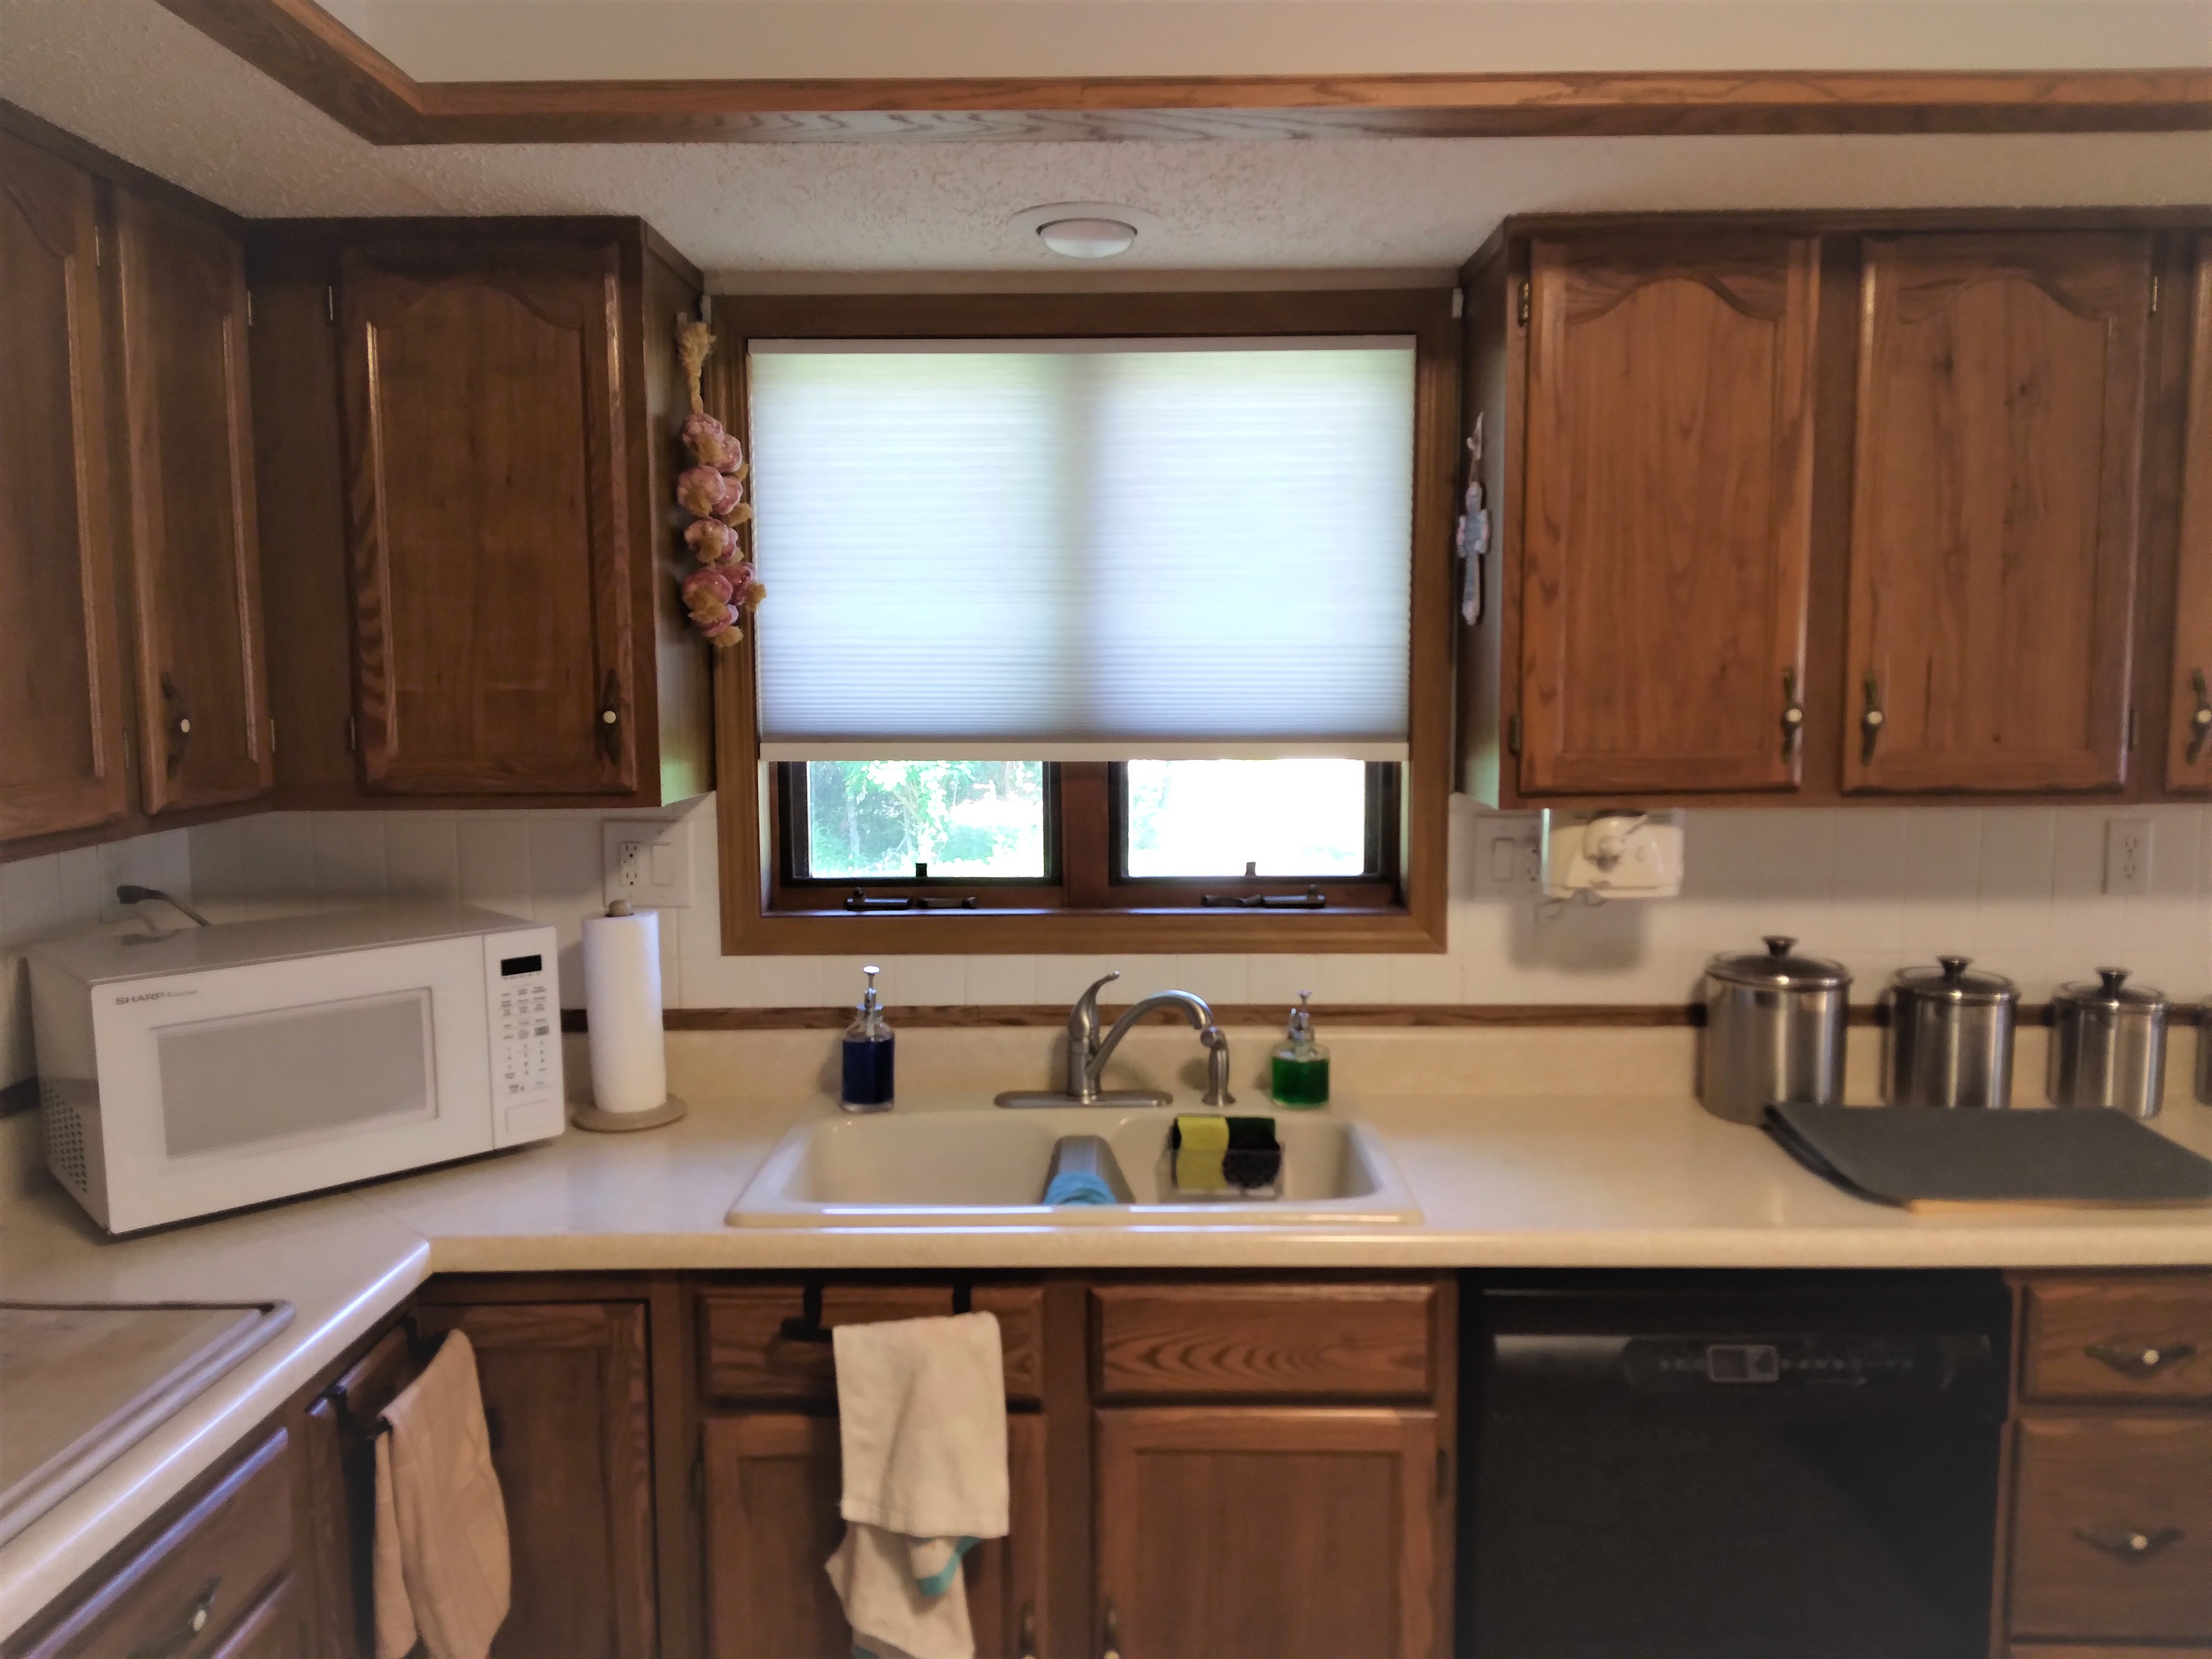 Grey light-filtering cellular shades in Springfield Illinois kitchen.  BudgetBlinds  WindowCoverings  Shades  CellularShades  SpringfieldIllinois